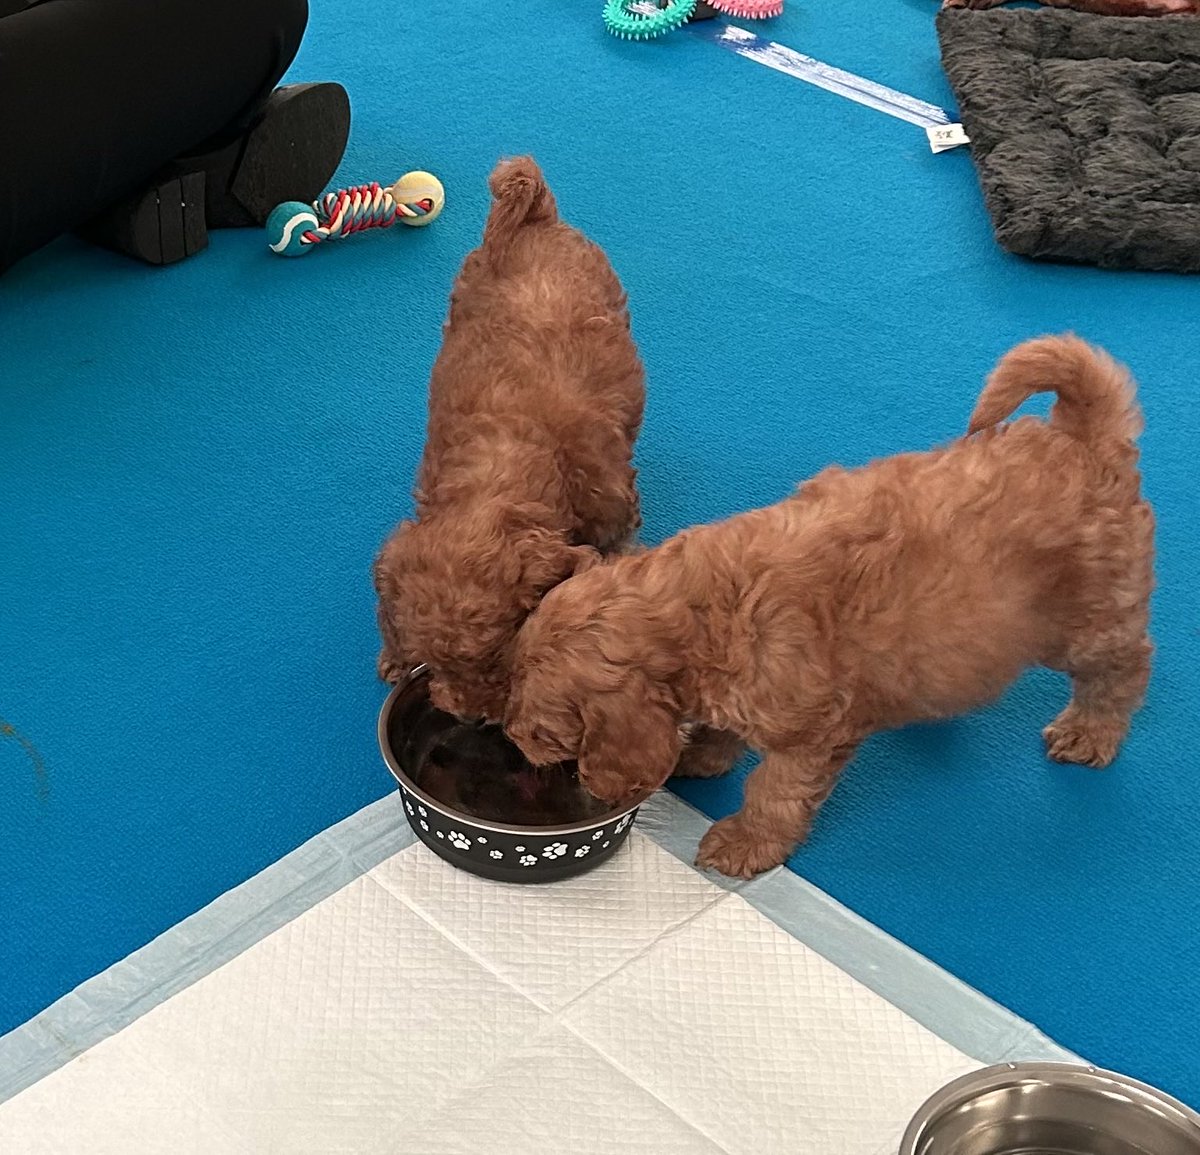 Pushing all the right buttons in the Wellness room at BIBA  #BIBA2023 Destress with adorable puppies 😍 #wellness